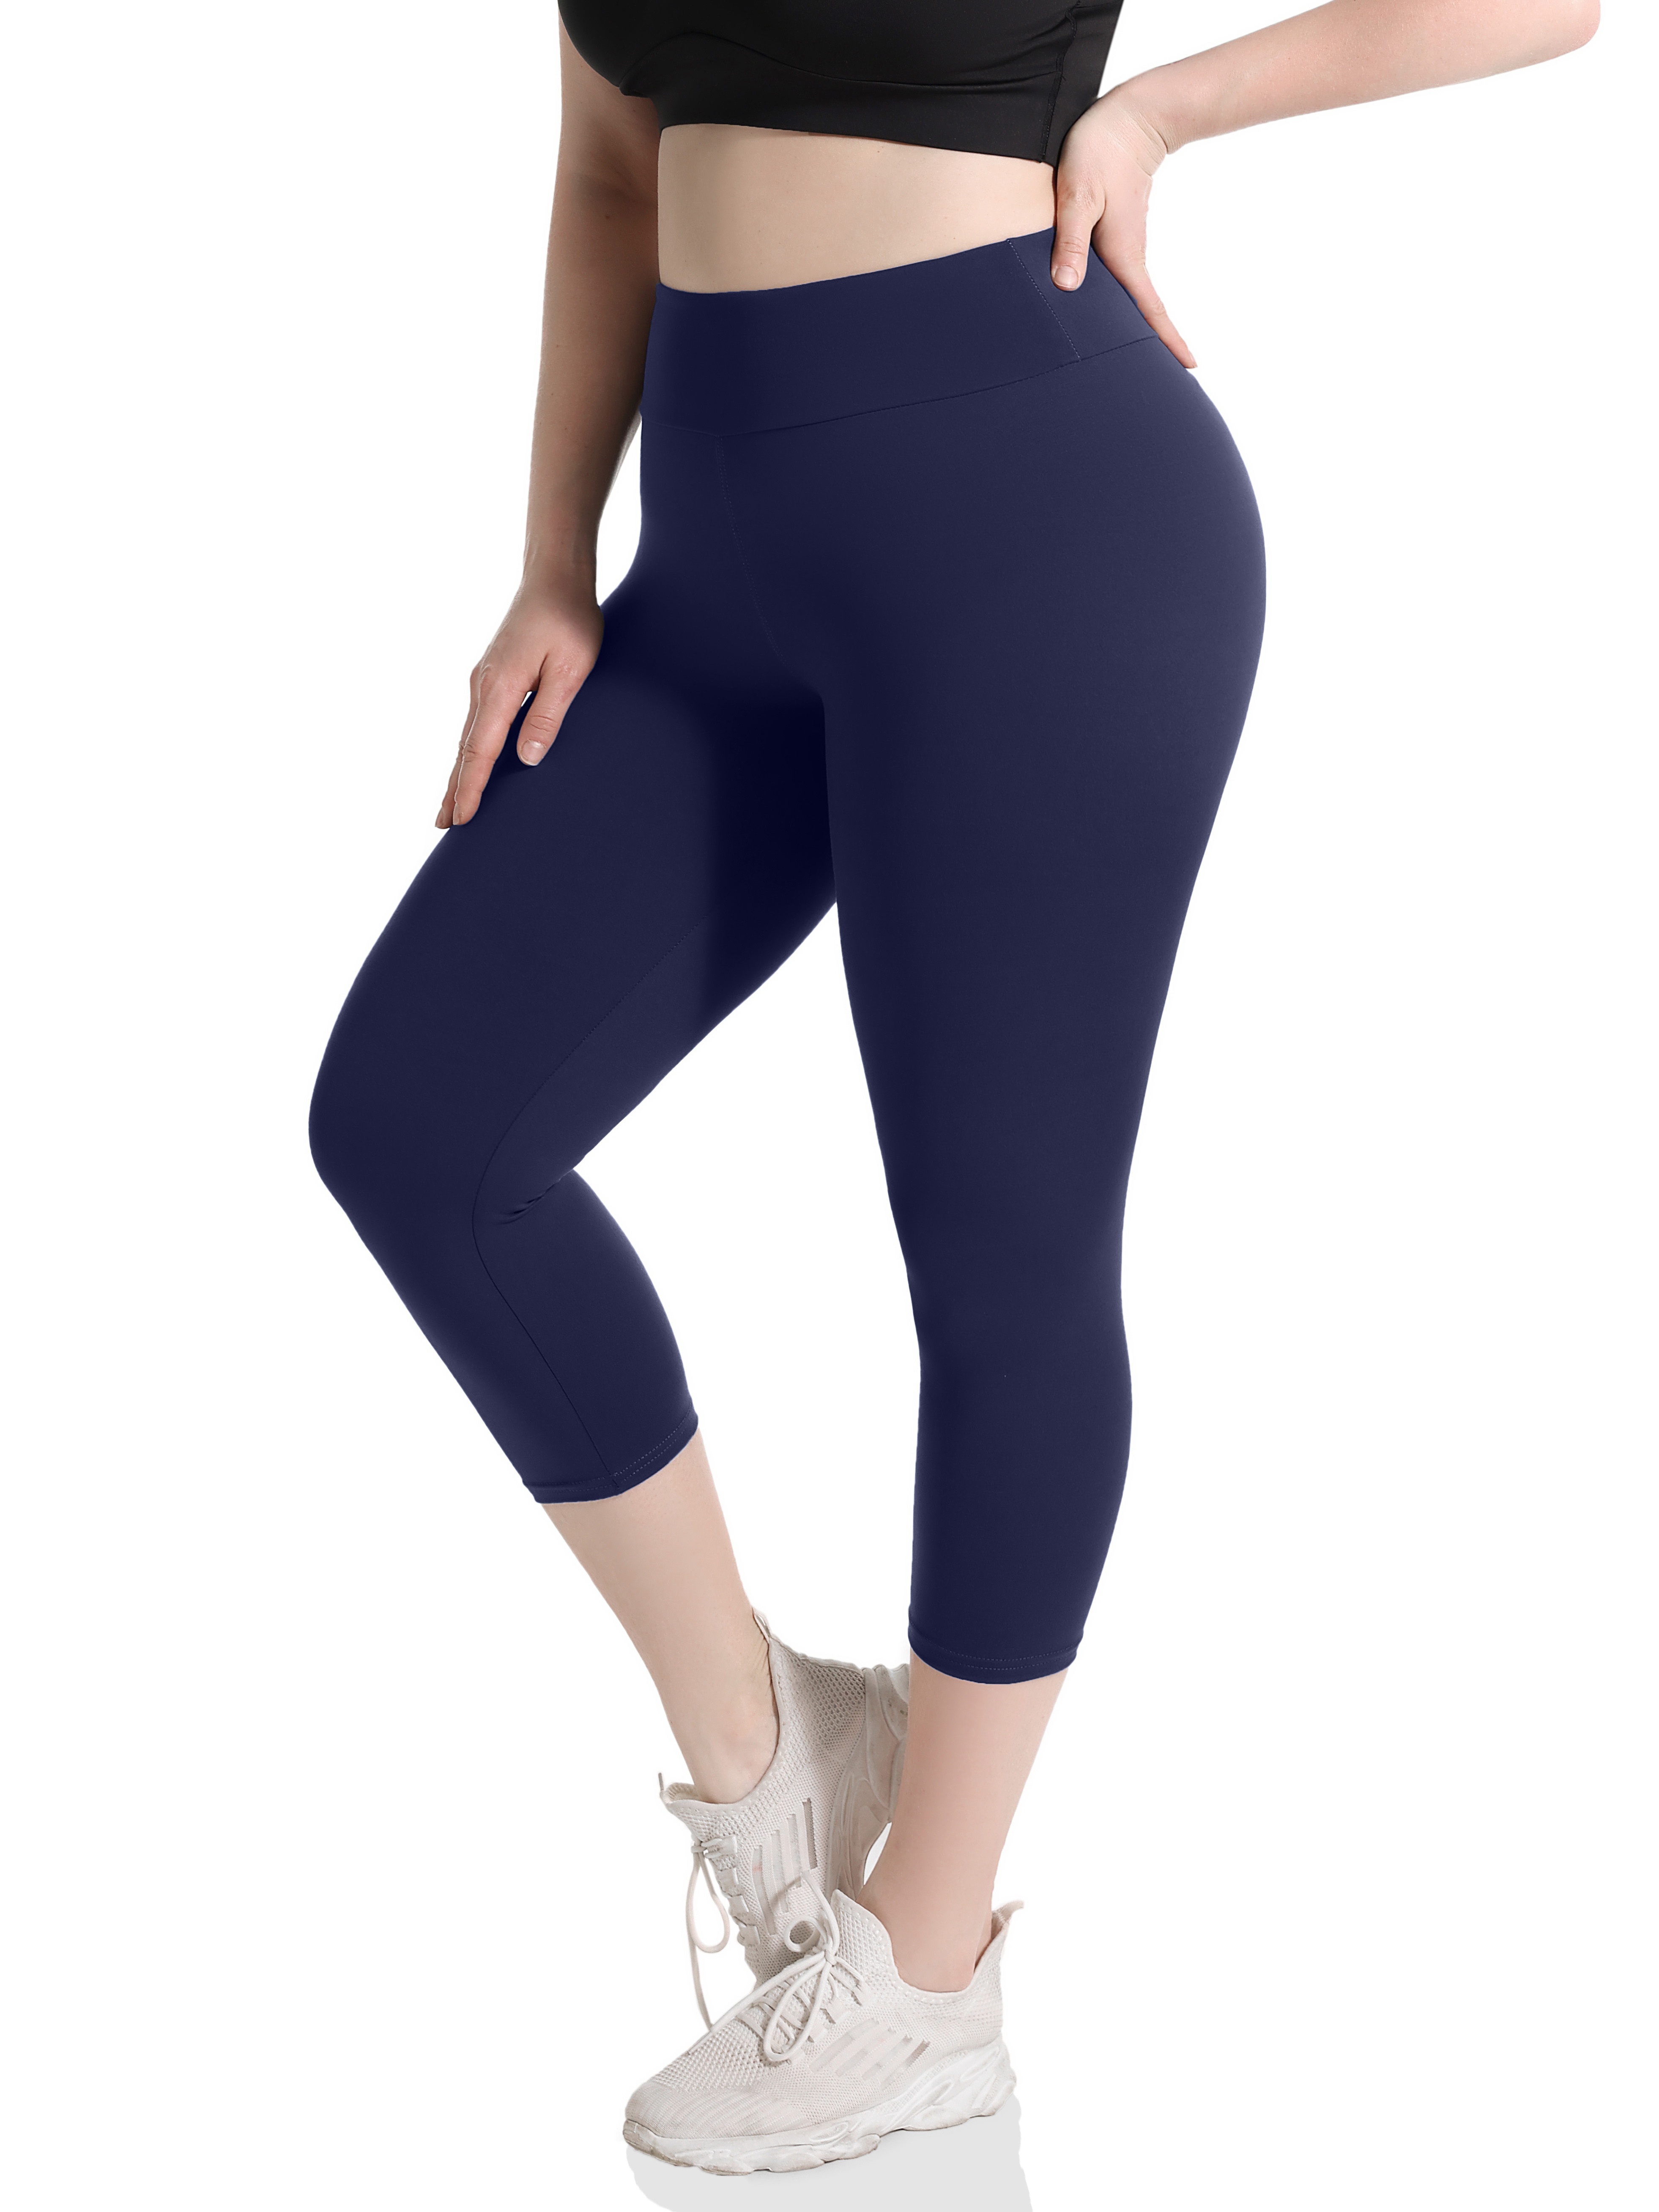 Buy Women's 2 Piece Plus Size Capri Yoga Leggings High Waisted Stretchy  Buttery Soft Workout Athletic Pants at